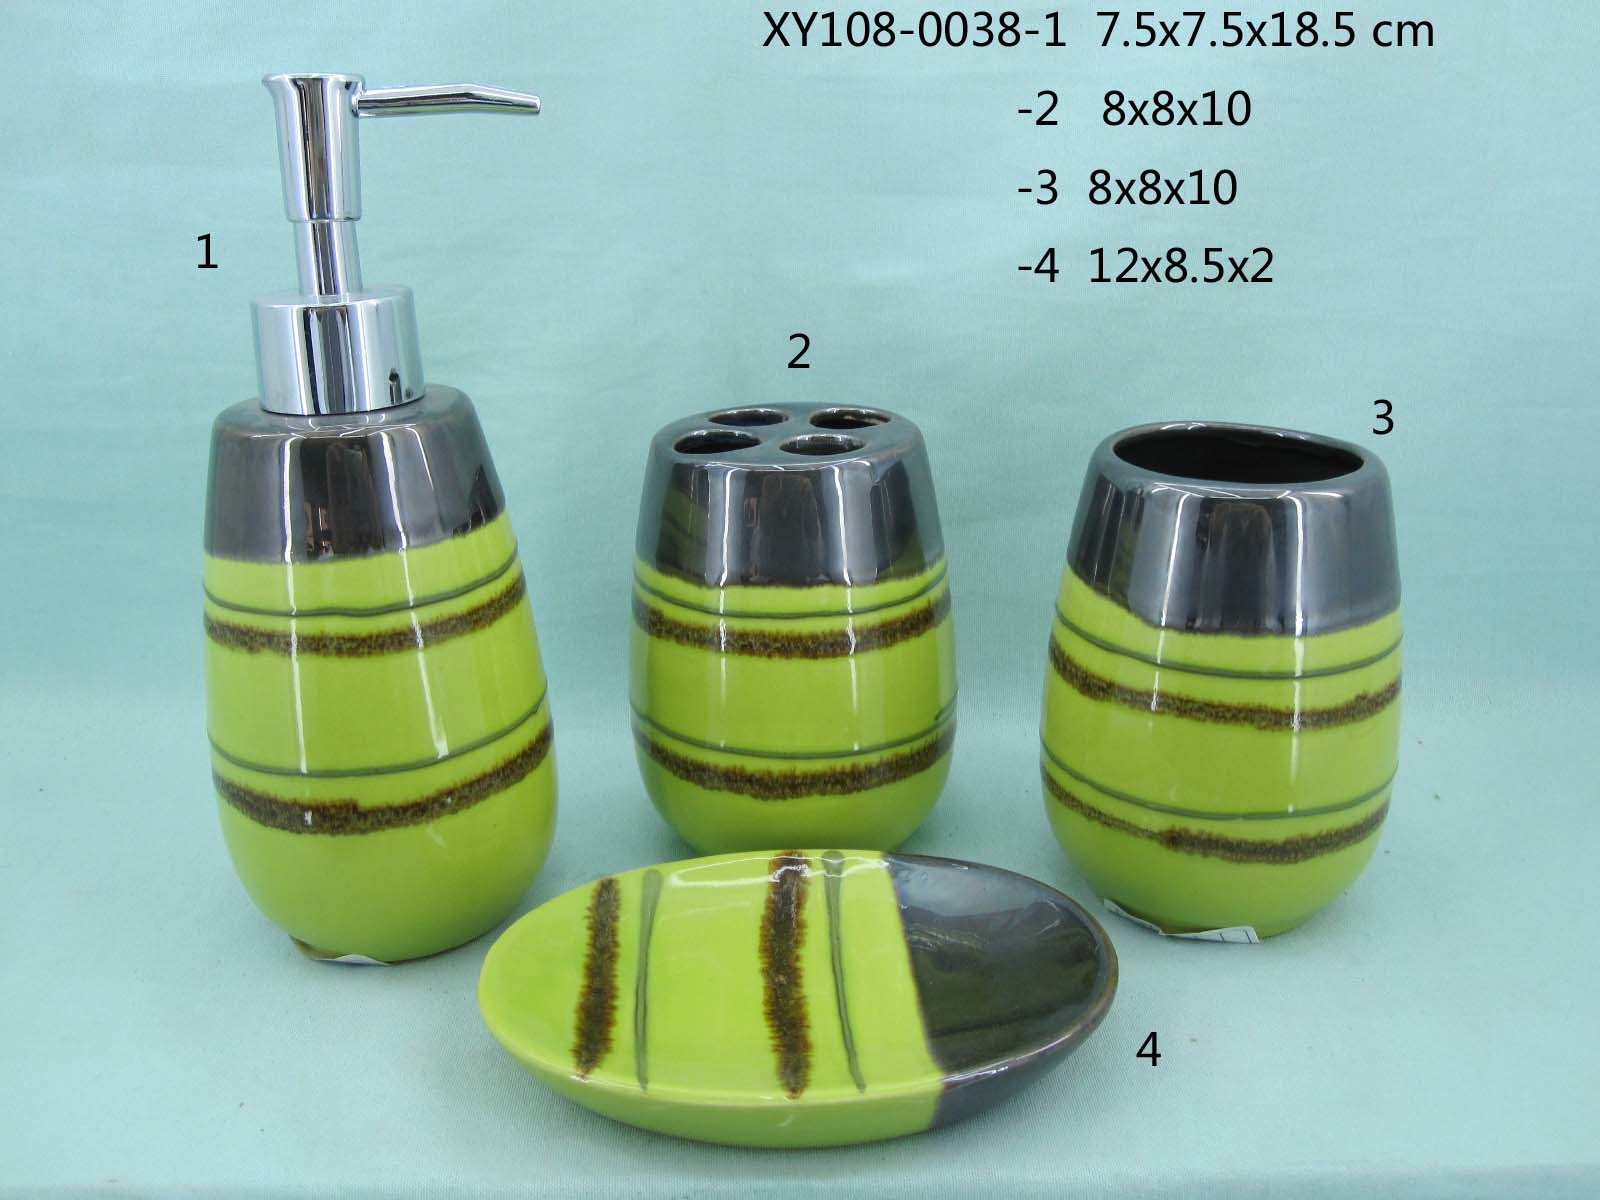 Ceramic Bathroom Set of 4 With Gift Box Packing